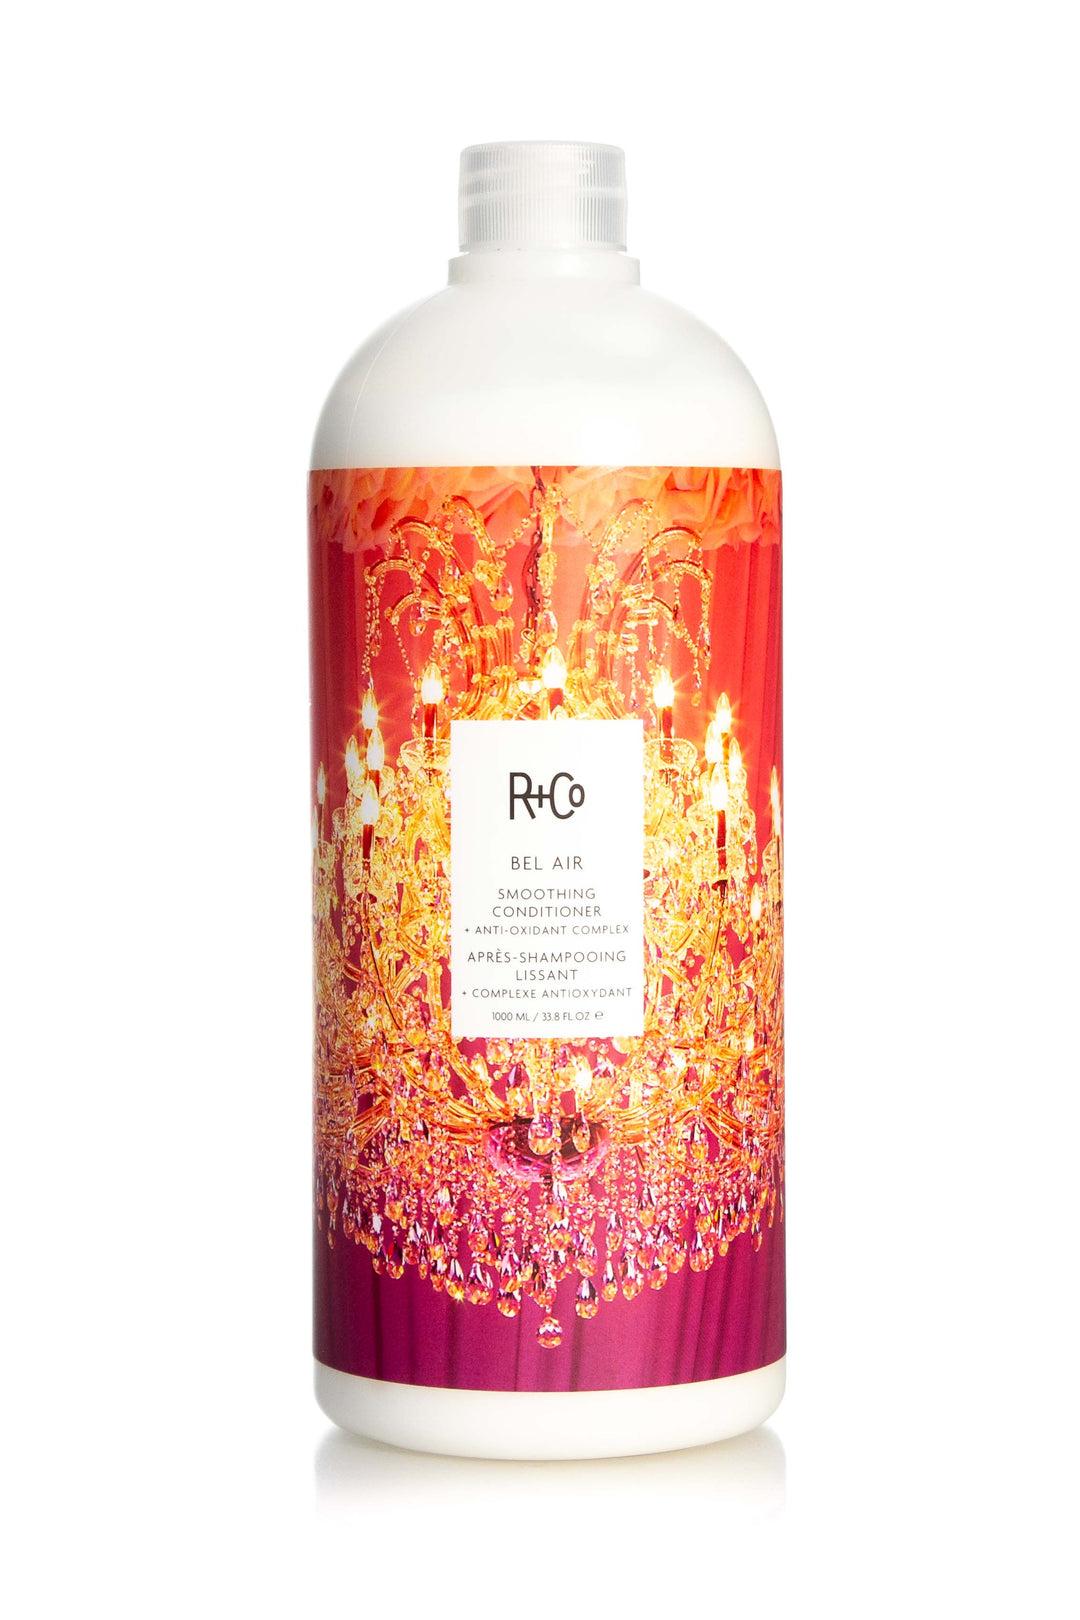 R+CO Belair Smoothing Conditioner + Anti Oxidant Complex | Various Sizes